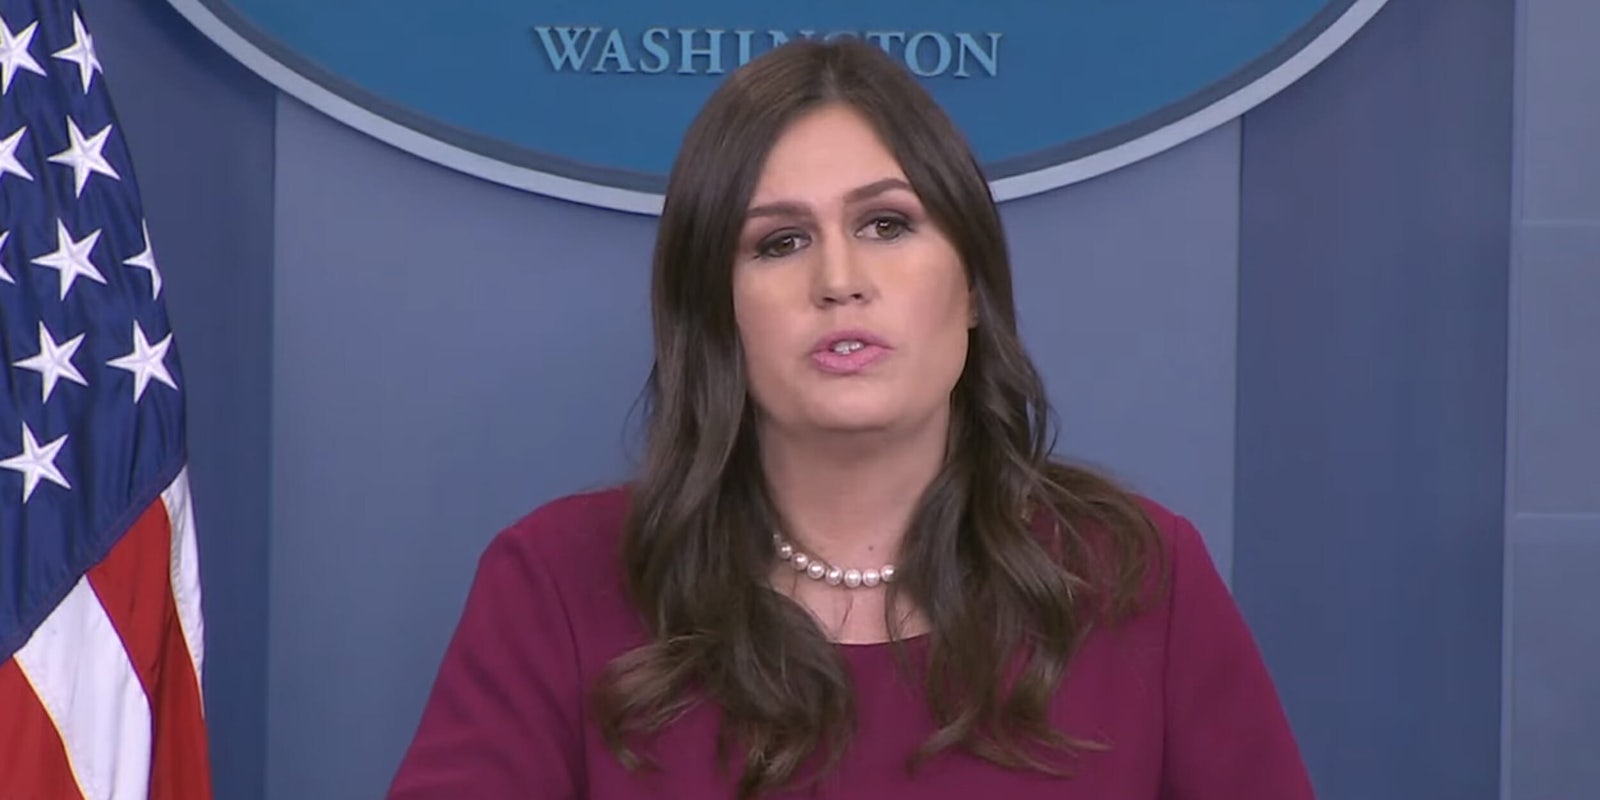 Sarah Huckabee Sanders responded to Trump's assertion that Congress should investigate the media for fake news